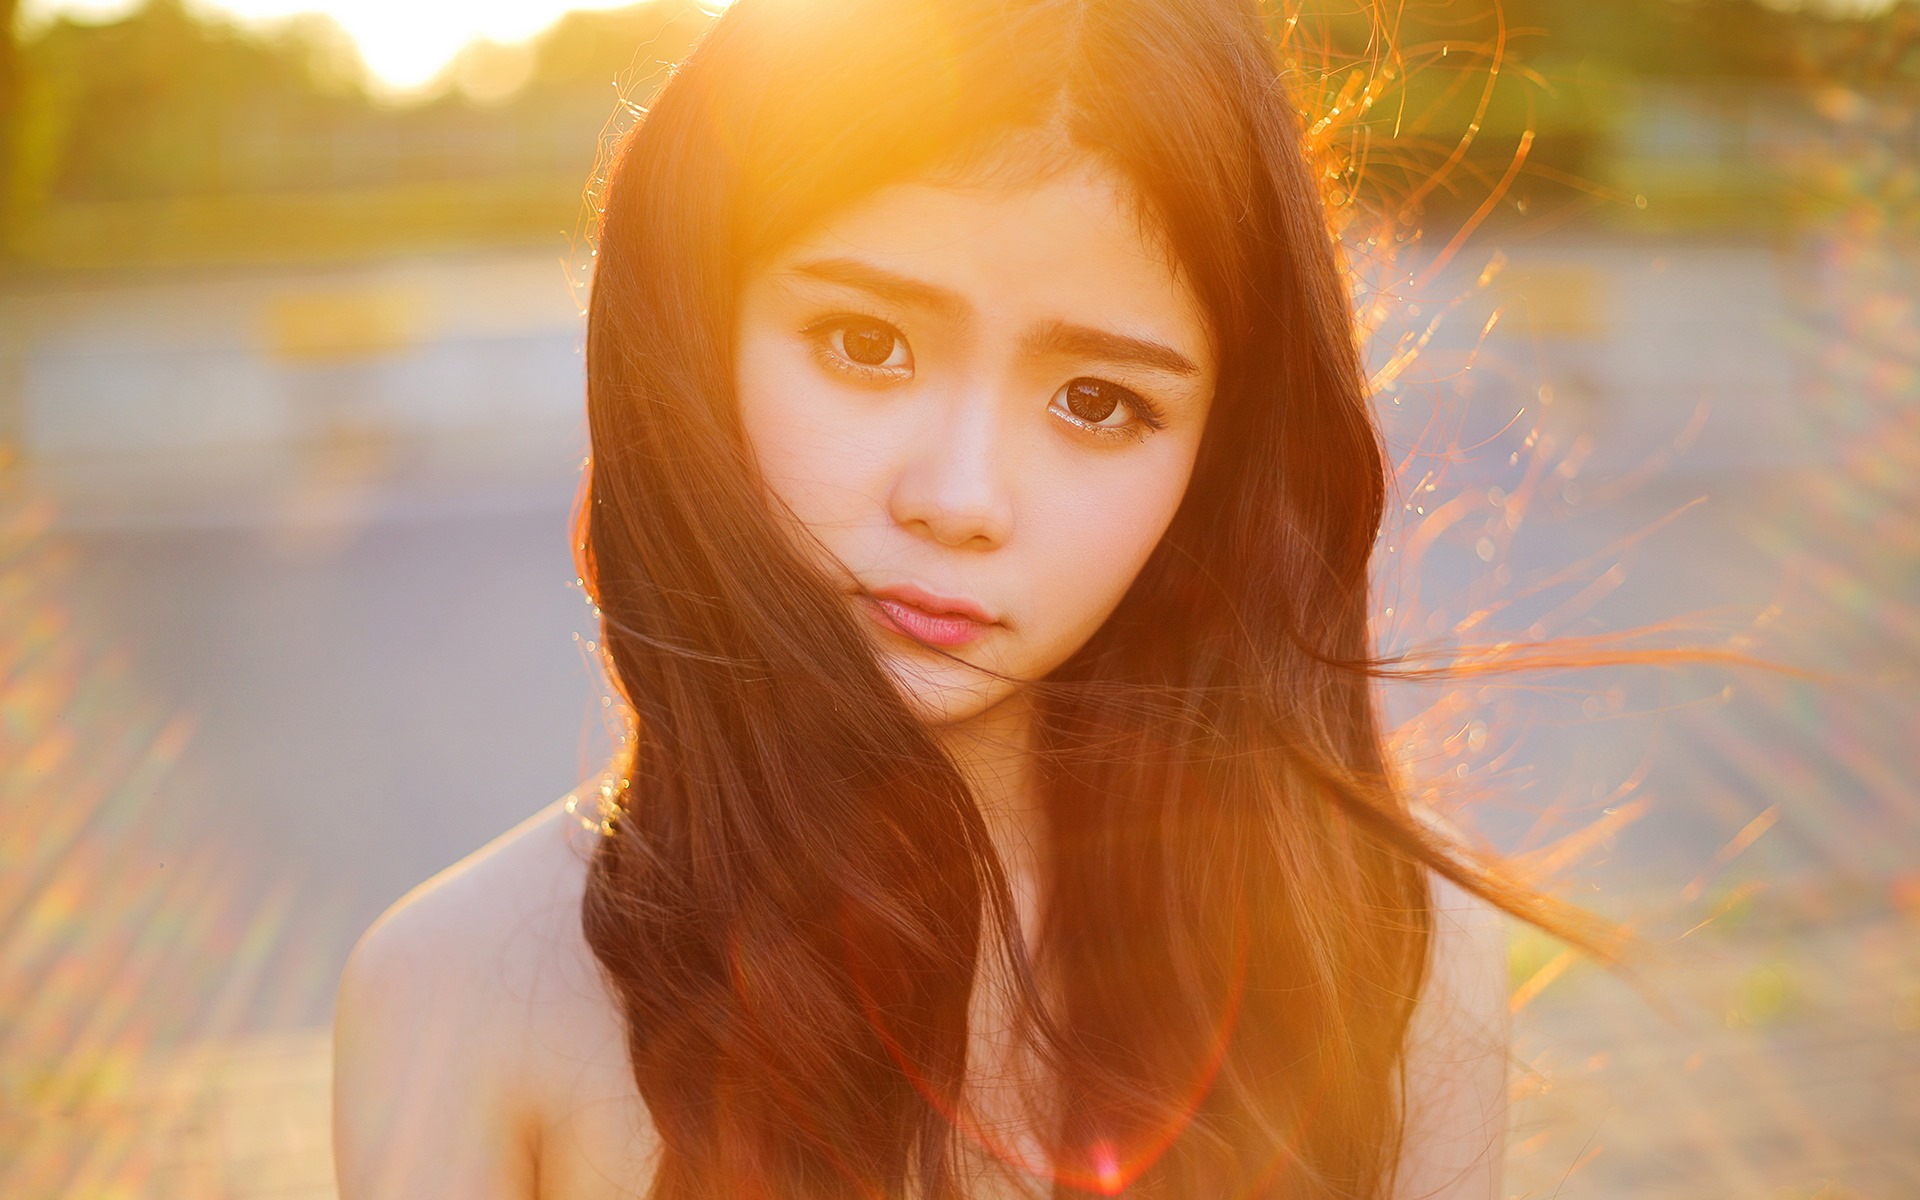 Pure and lovely young Asian girl HD wallpapers collection (3) #21 - 1920x1200